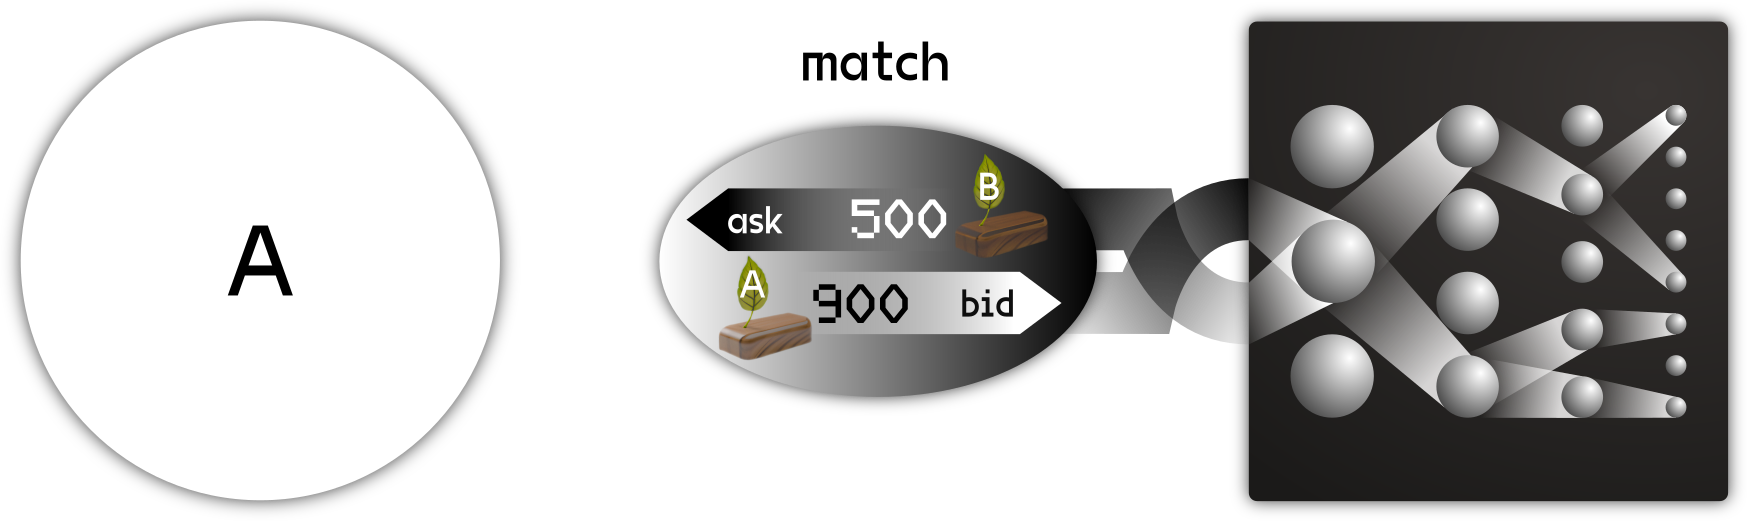 Figure 10.3 The network matches A’s stake exchange offer